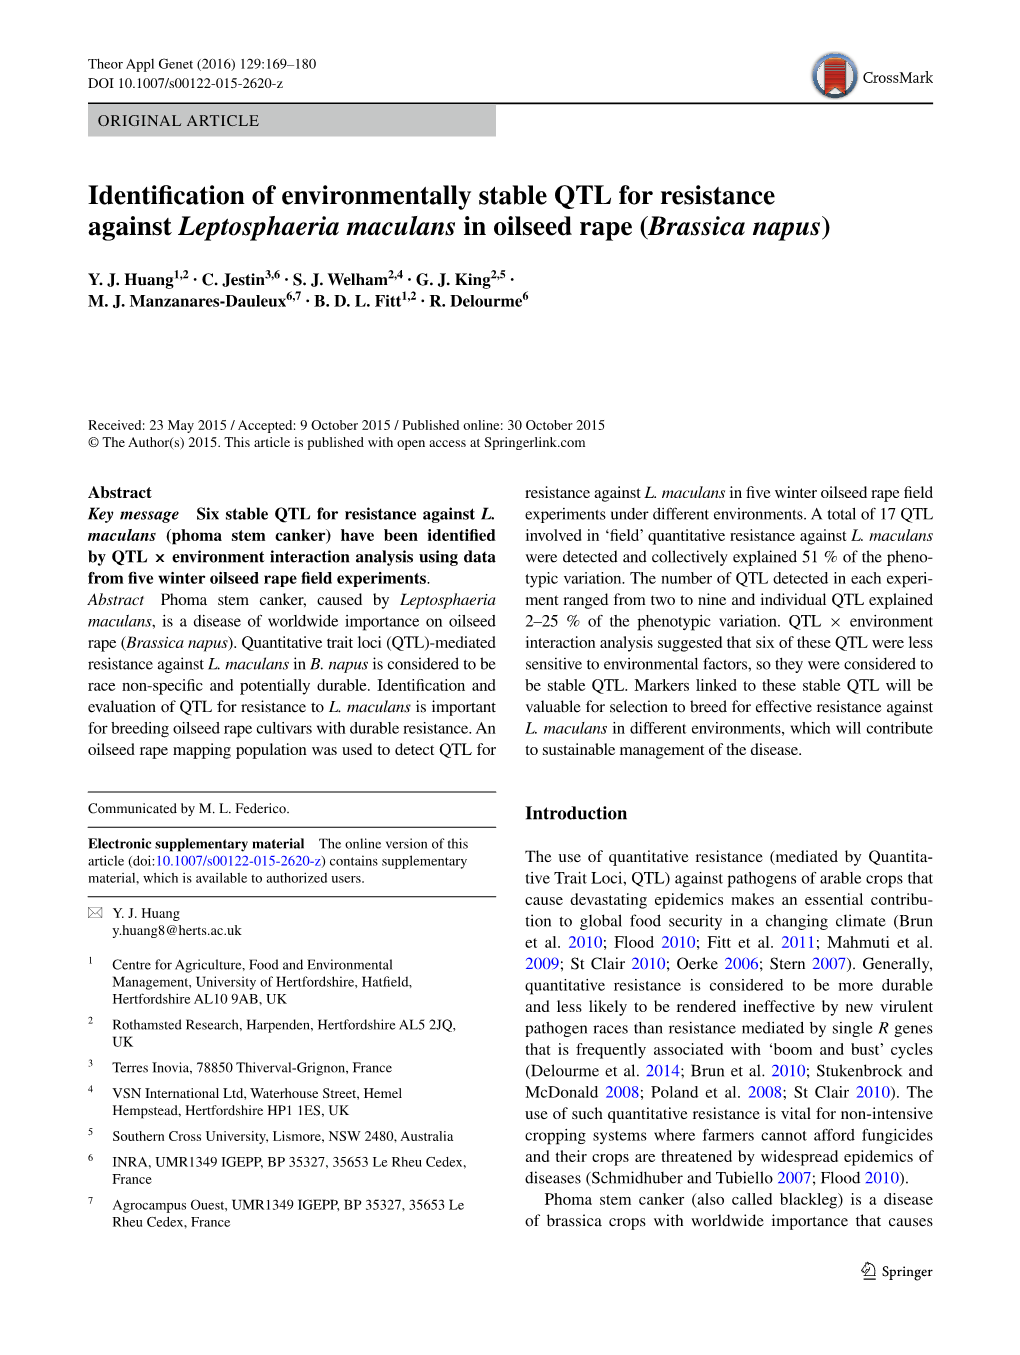 Identification of Environmentally Stable QTL for Resistance Against Leptosphaeria Maculans in Oilseed Rape (Brassica Napus)